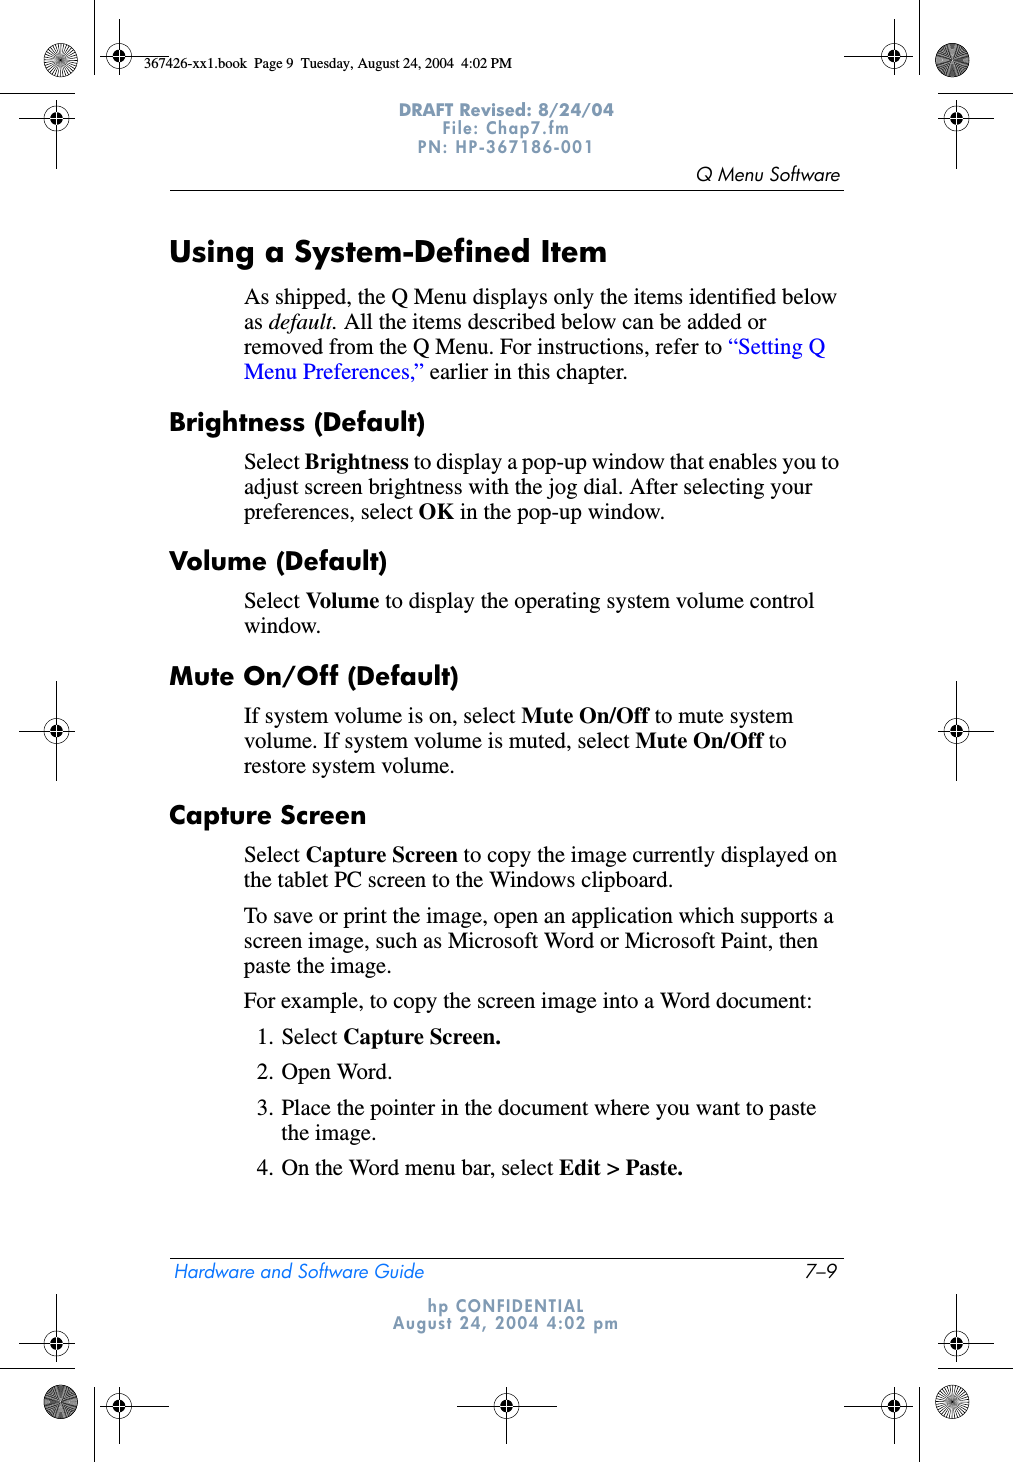 Q Menu SoftwareHardware and Software Guide 7–9DRAFT Revised: 8/24/04File: Chap7.fm PN: HP-367186-001 hp CONFIDENTIALAugust 24, 2004 4:02 pmUsing a System-Defined ItemAs shipped, the Q Menu displays only the items identified below as default. All the items described below can be added or removed from the Q Menu. For instructions, refer to “Setting Q Menu Preferences,” earlier in this chapter.Brightness (Default)Select Brightness to display a pop-up window that enables you to adjust screen brightness with the jog dial. After selecting your preferences, select OK in the pop-up window.Volume (Default)Select Volume to display the operating system volume control window.Mute On/Off (Default)If system volume is on, select Mute On/Off to mute system volume. If system volume is muted, select Mute On/Off to restore system volume.Capture ScreenSelect Capture Screen to copy the image currently displayed on the tablet PC screen to the Windows clipboard.To save or print the image, open an application which supports a screen image, such as Microsoft Word or Microsoft Paint, then paste the image.For example, to copy the screen image into a Word document:1. Select Capture Screen.2. Open Word.3. Place the pointer in the document where you want to paste the image.4. On the Word menu bar, select Edit &gt; Paste.367426-xx1.book  Page 9  Tuesday, August 24, 2004  4:02 PM